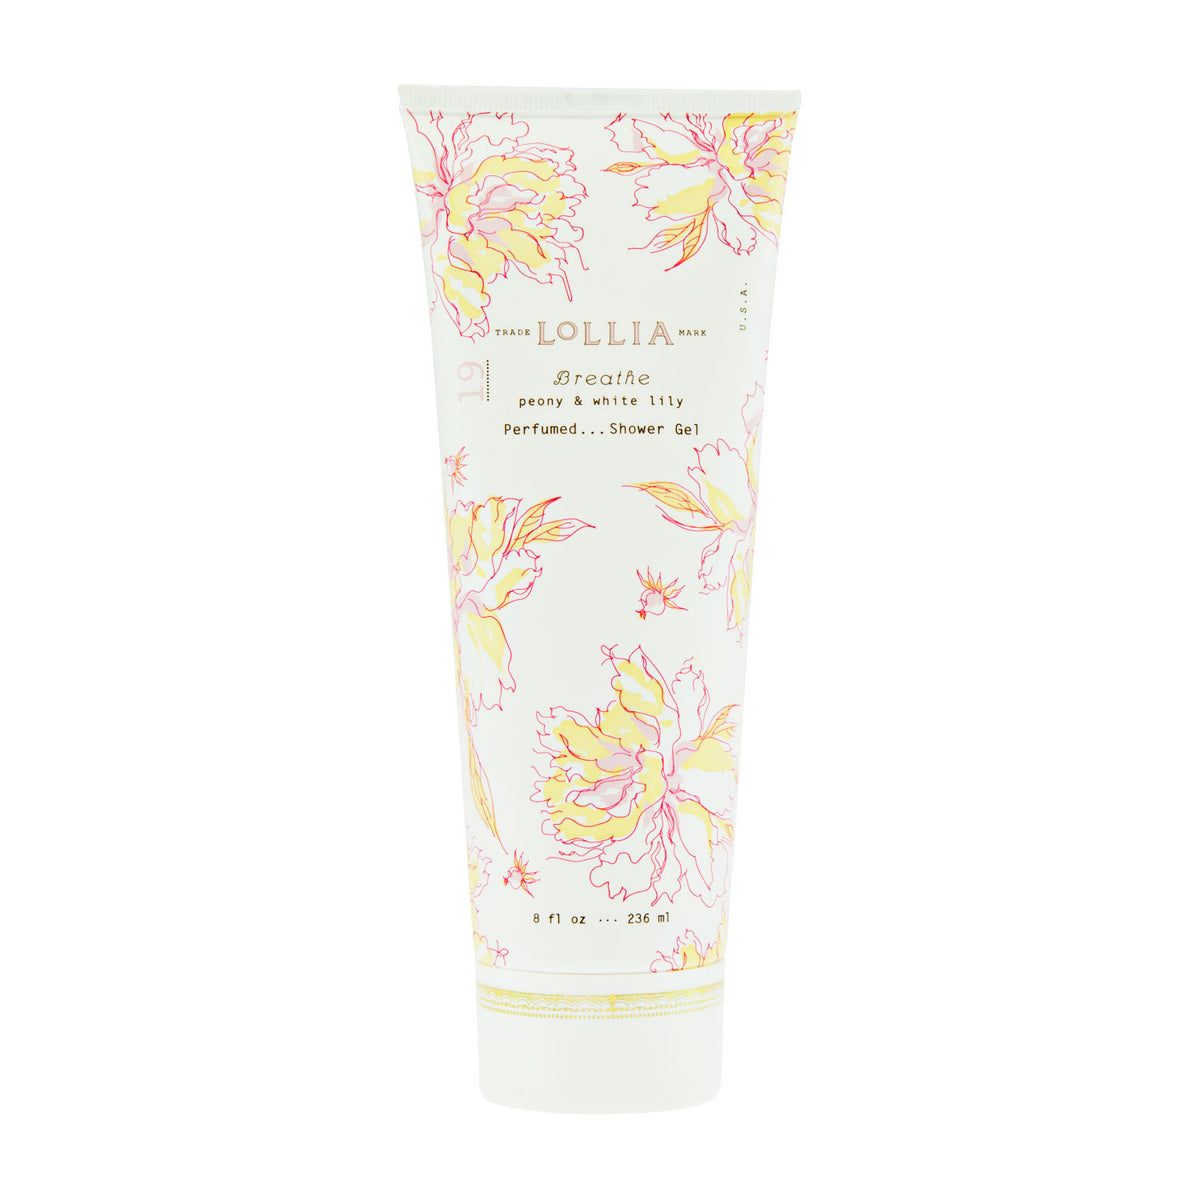 A tall cylindrical tube of Margot Elena's Lollia Breathe Perfumed Shower Gel, decorated with soft pink and yellow floral designs. The packaging displays peony, white lily fragrances, and leafy notes.